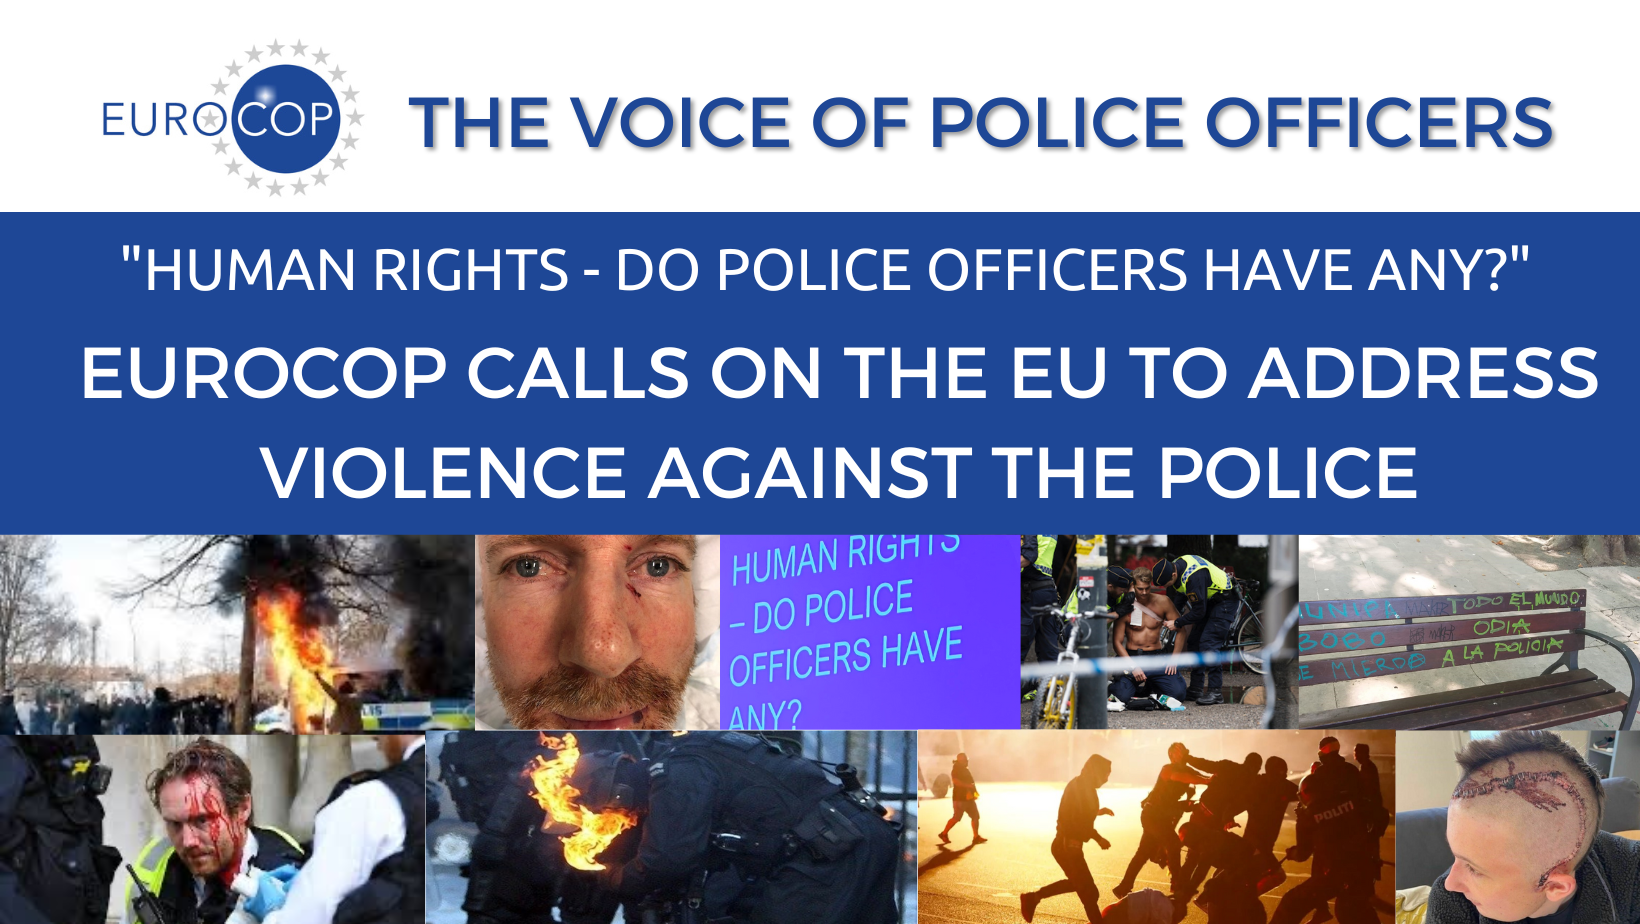 EuroCOP calls on the EU to address Violence against the Police